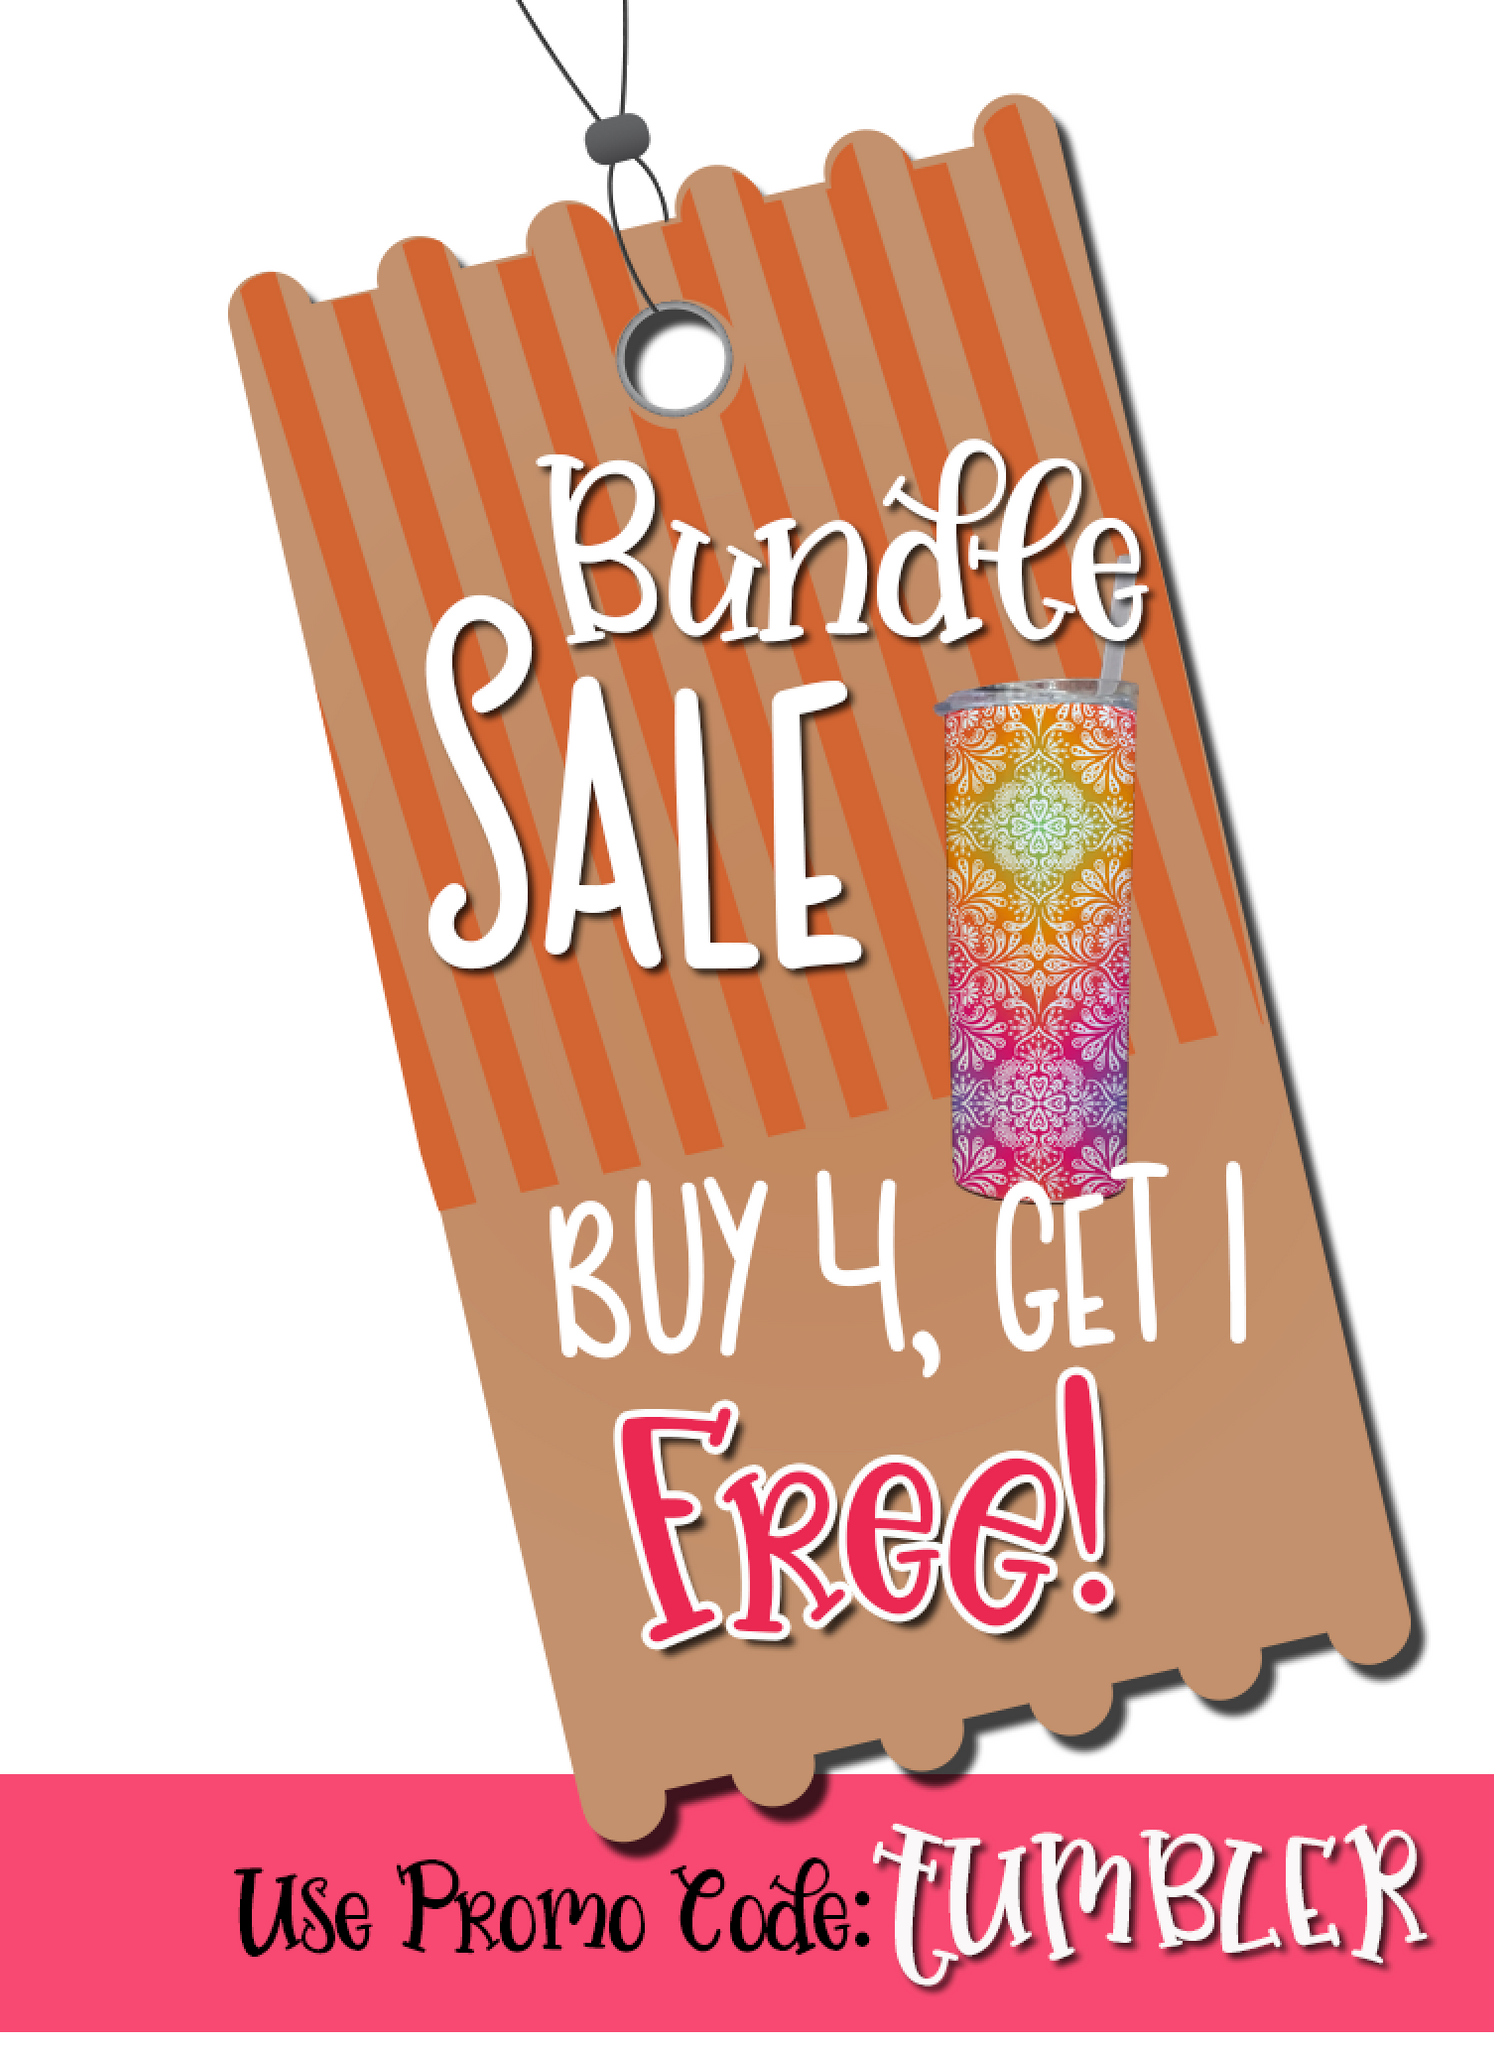 BUNDLE SALE!!!! USE DISCOUNT CODE: TUMBLER for Buy4Get1FREE (5th is free)